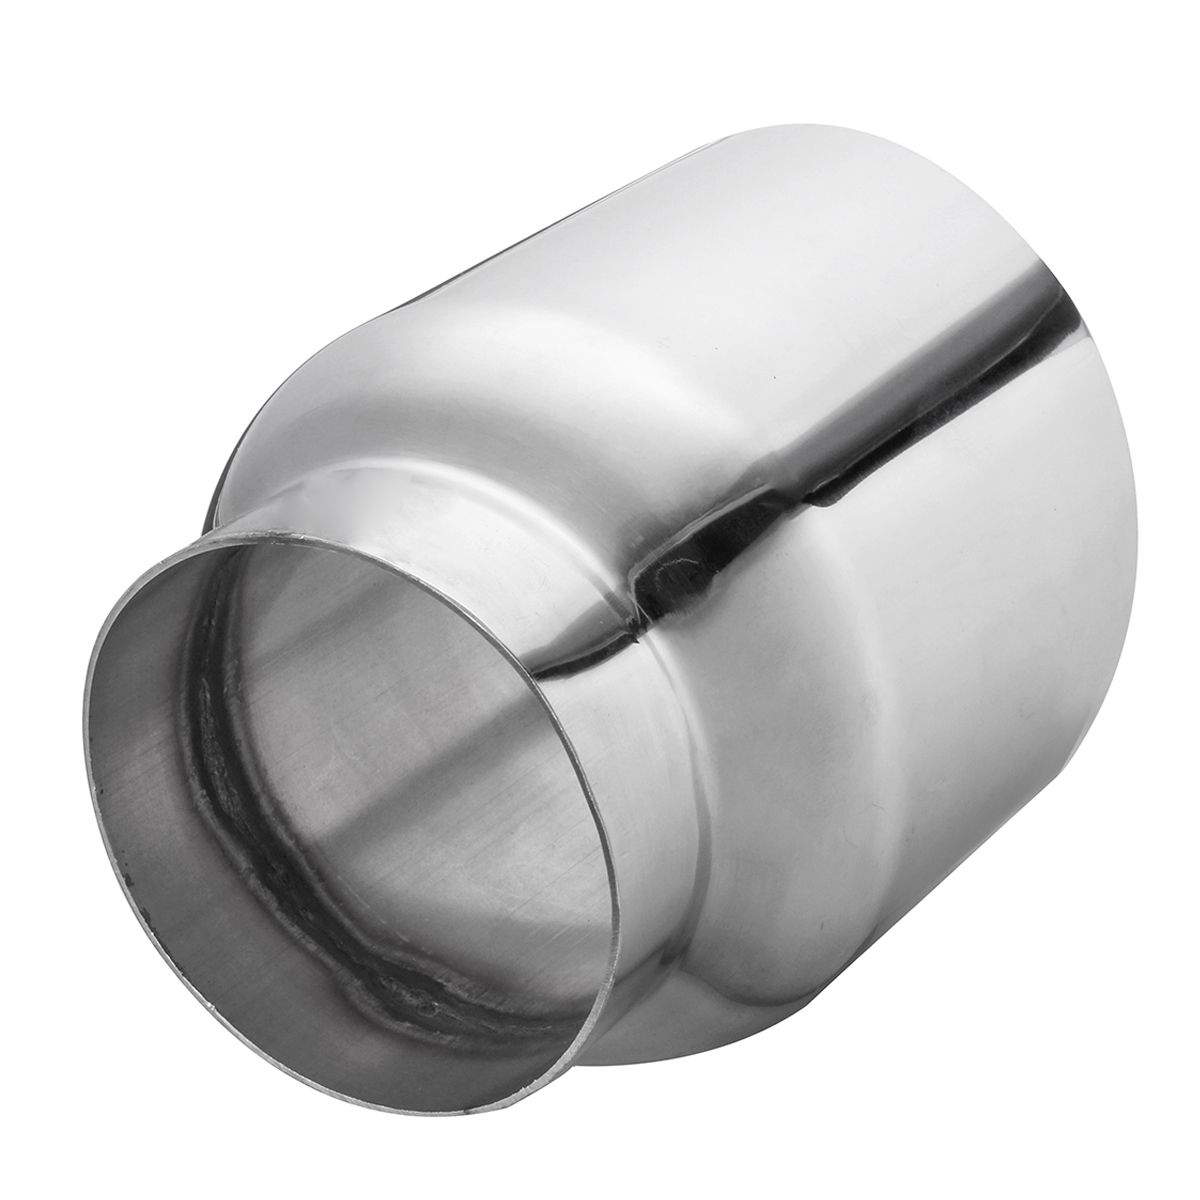 Universal-Stainless-Steel-Exhaust-Muffler-Double-Wall-Round-Slant-3-Inch-Inelt-4-Inch-Outlet-1355363